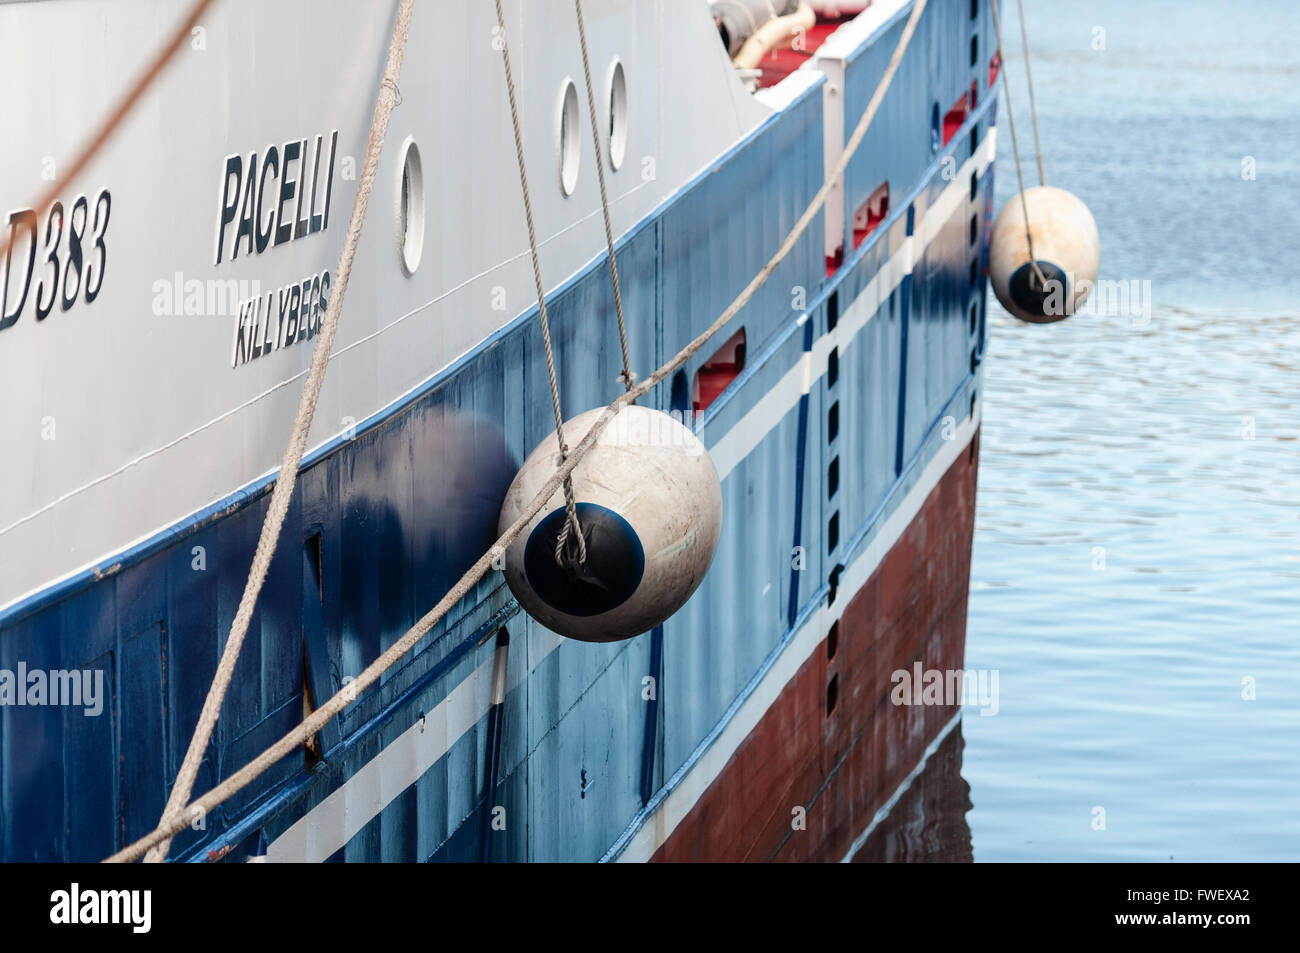 Fenders on the side of a fishing trawler in Killybegs, Ireland. Stock Photo